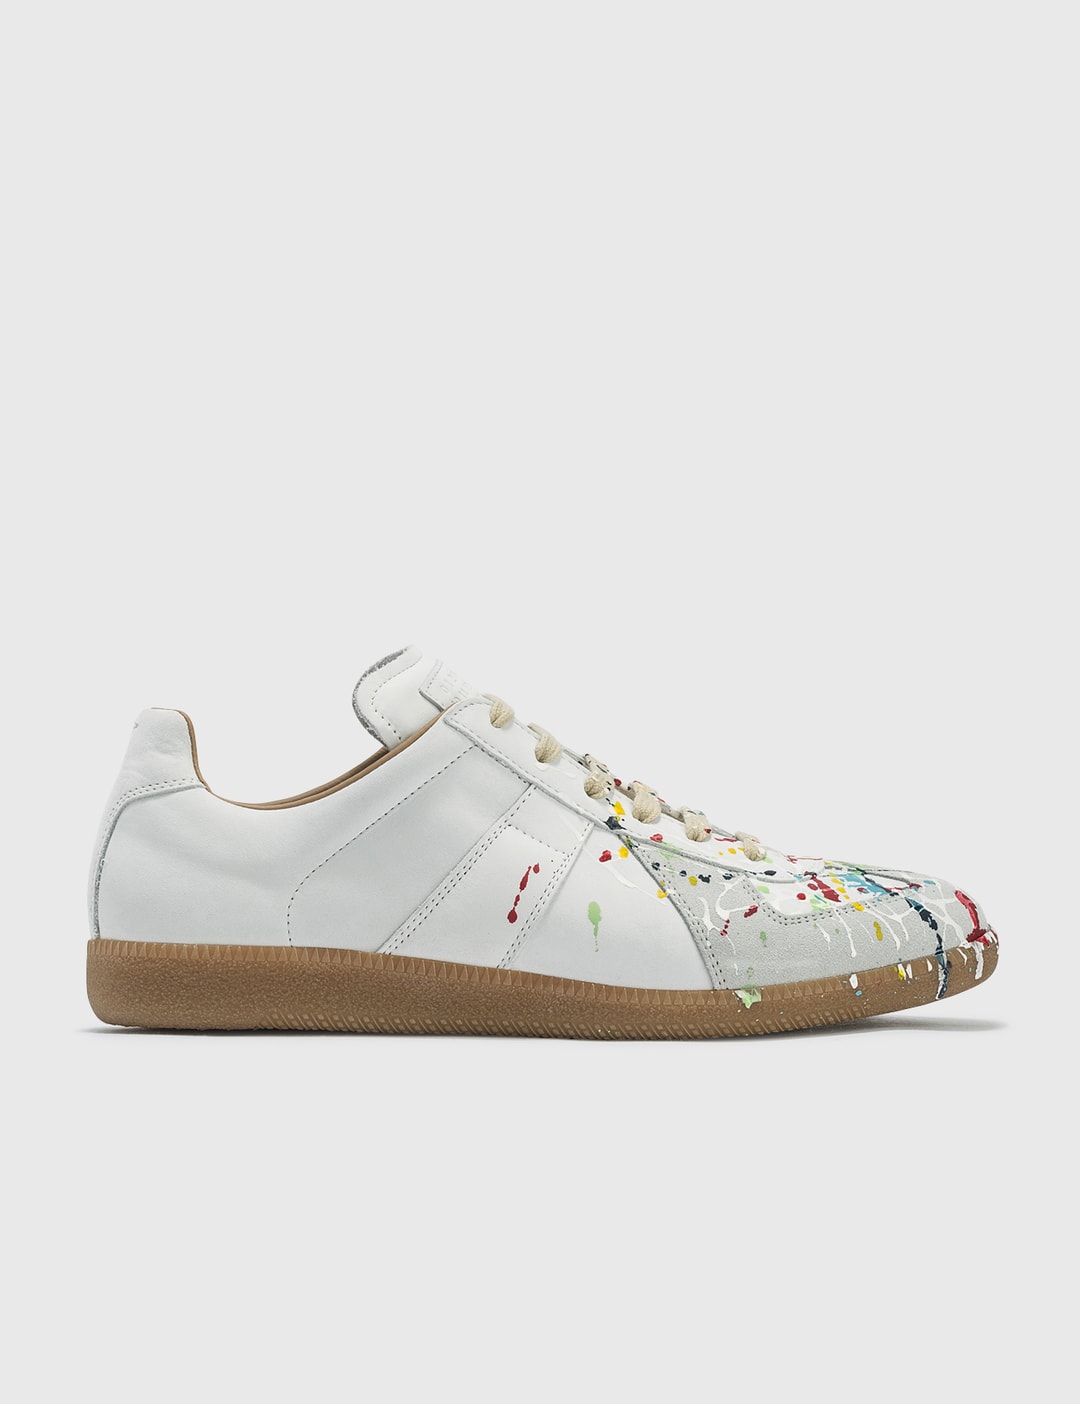 Maison Margiela - Replica Paint Drop Sneakers | HBX - Globally Curated ...